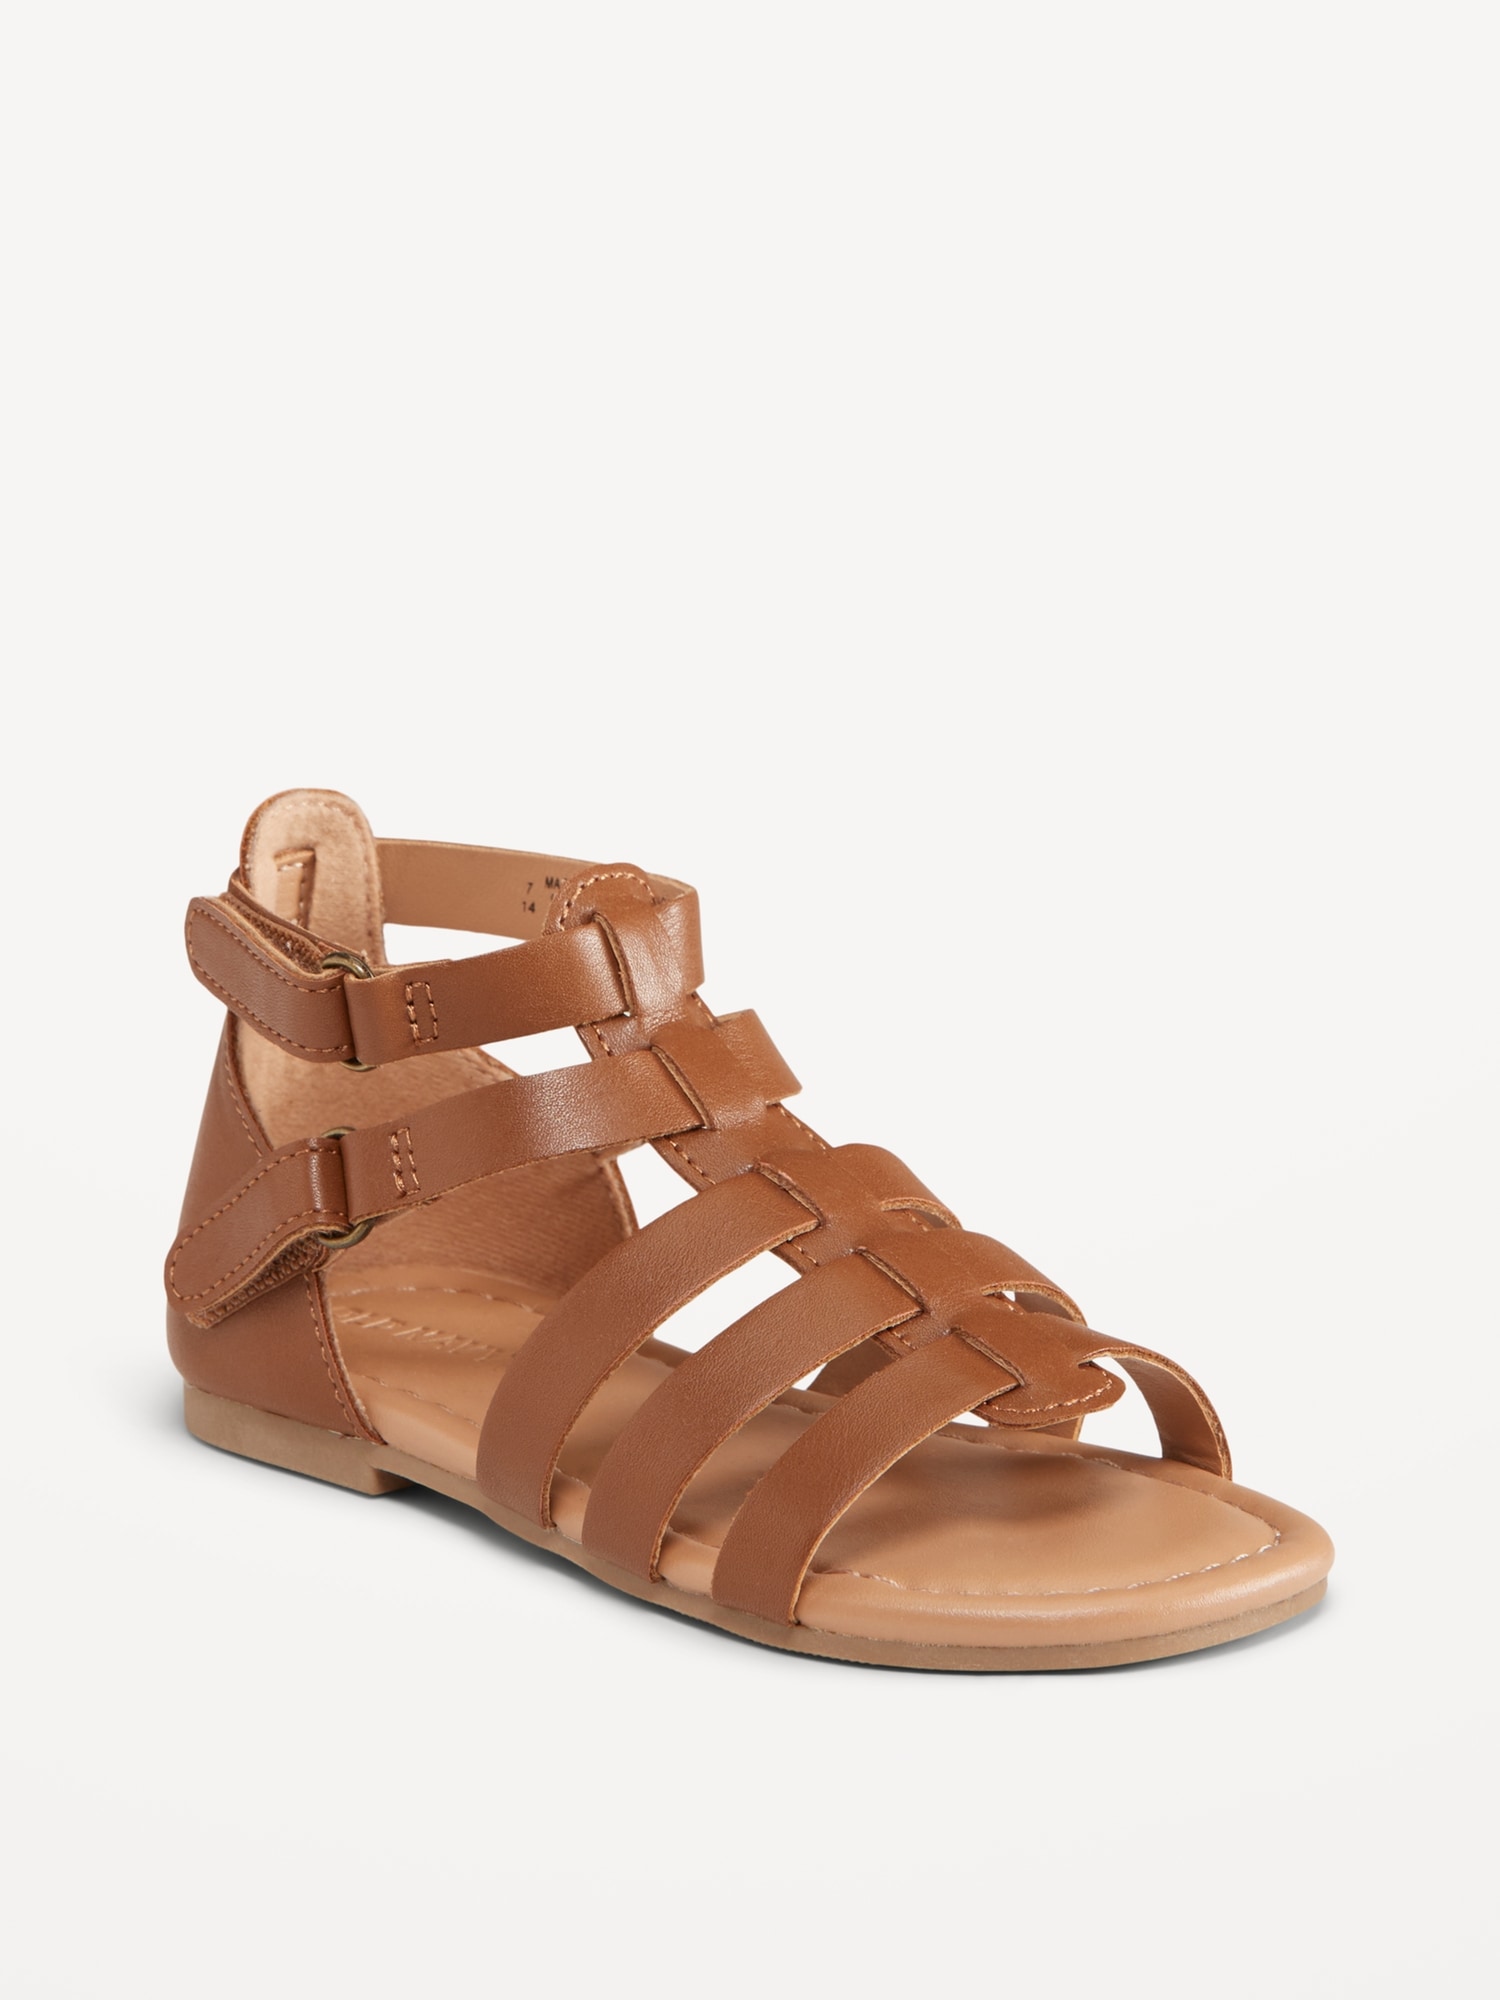 Faux-Leather Gladiator Sandals for Toddler Girls